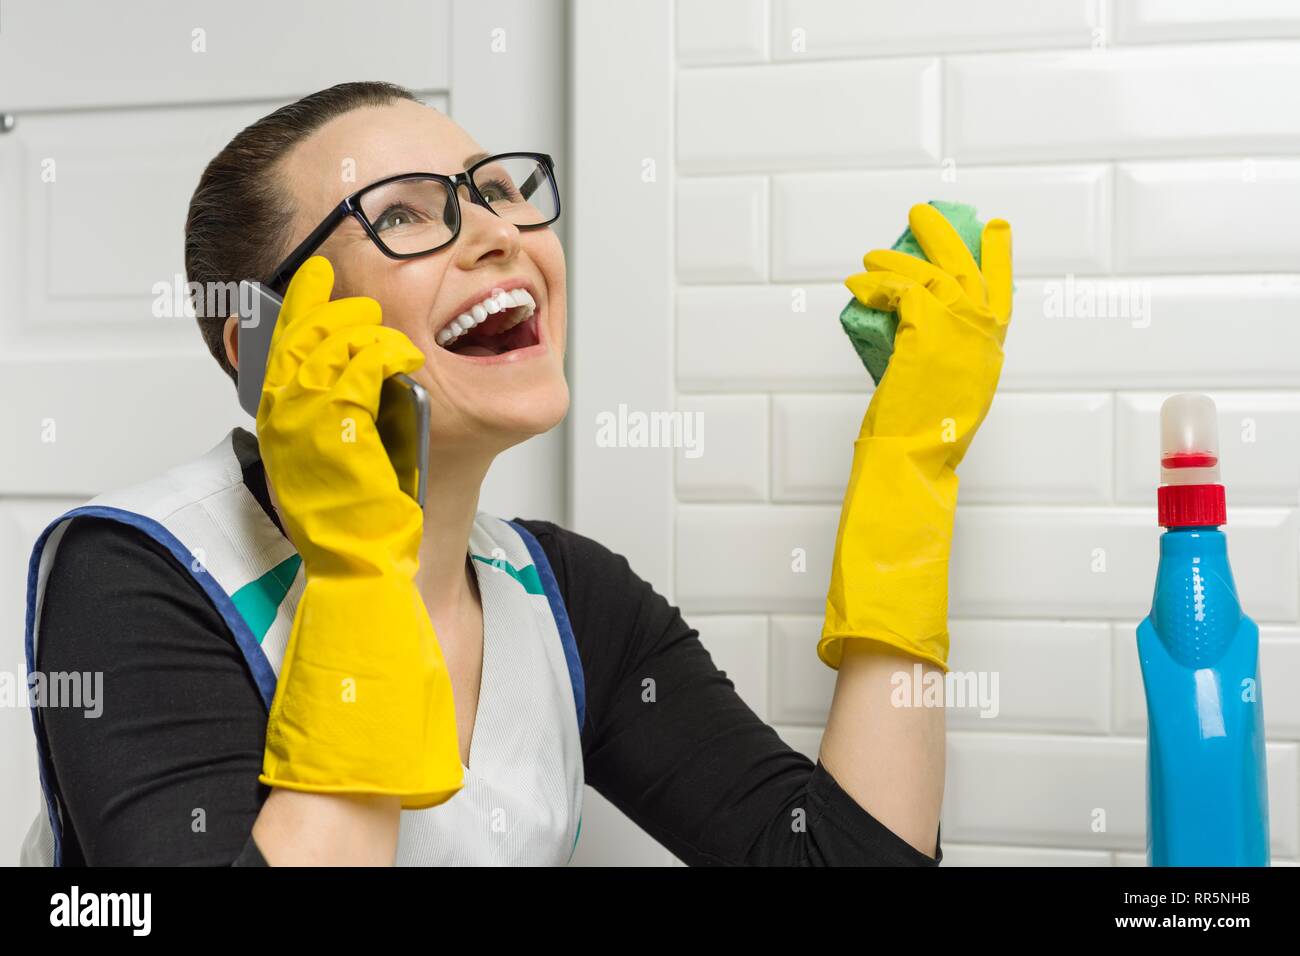 Female House Cleaning Talking Stock Photos & Female House Cleaning ...